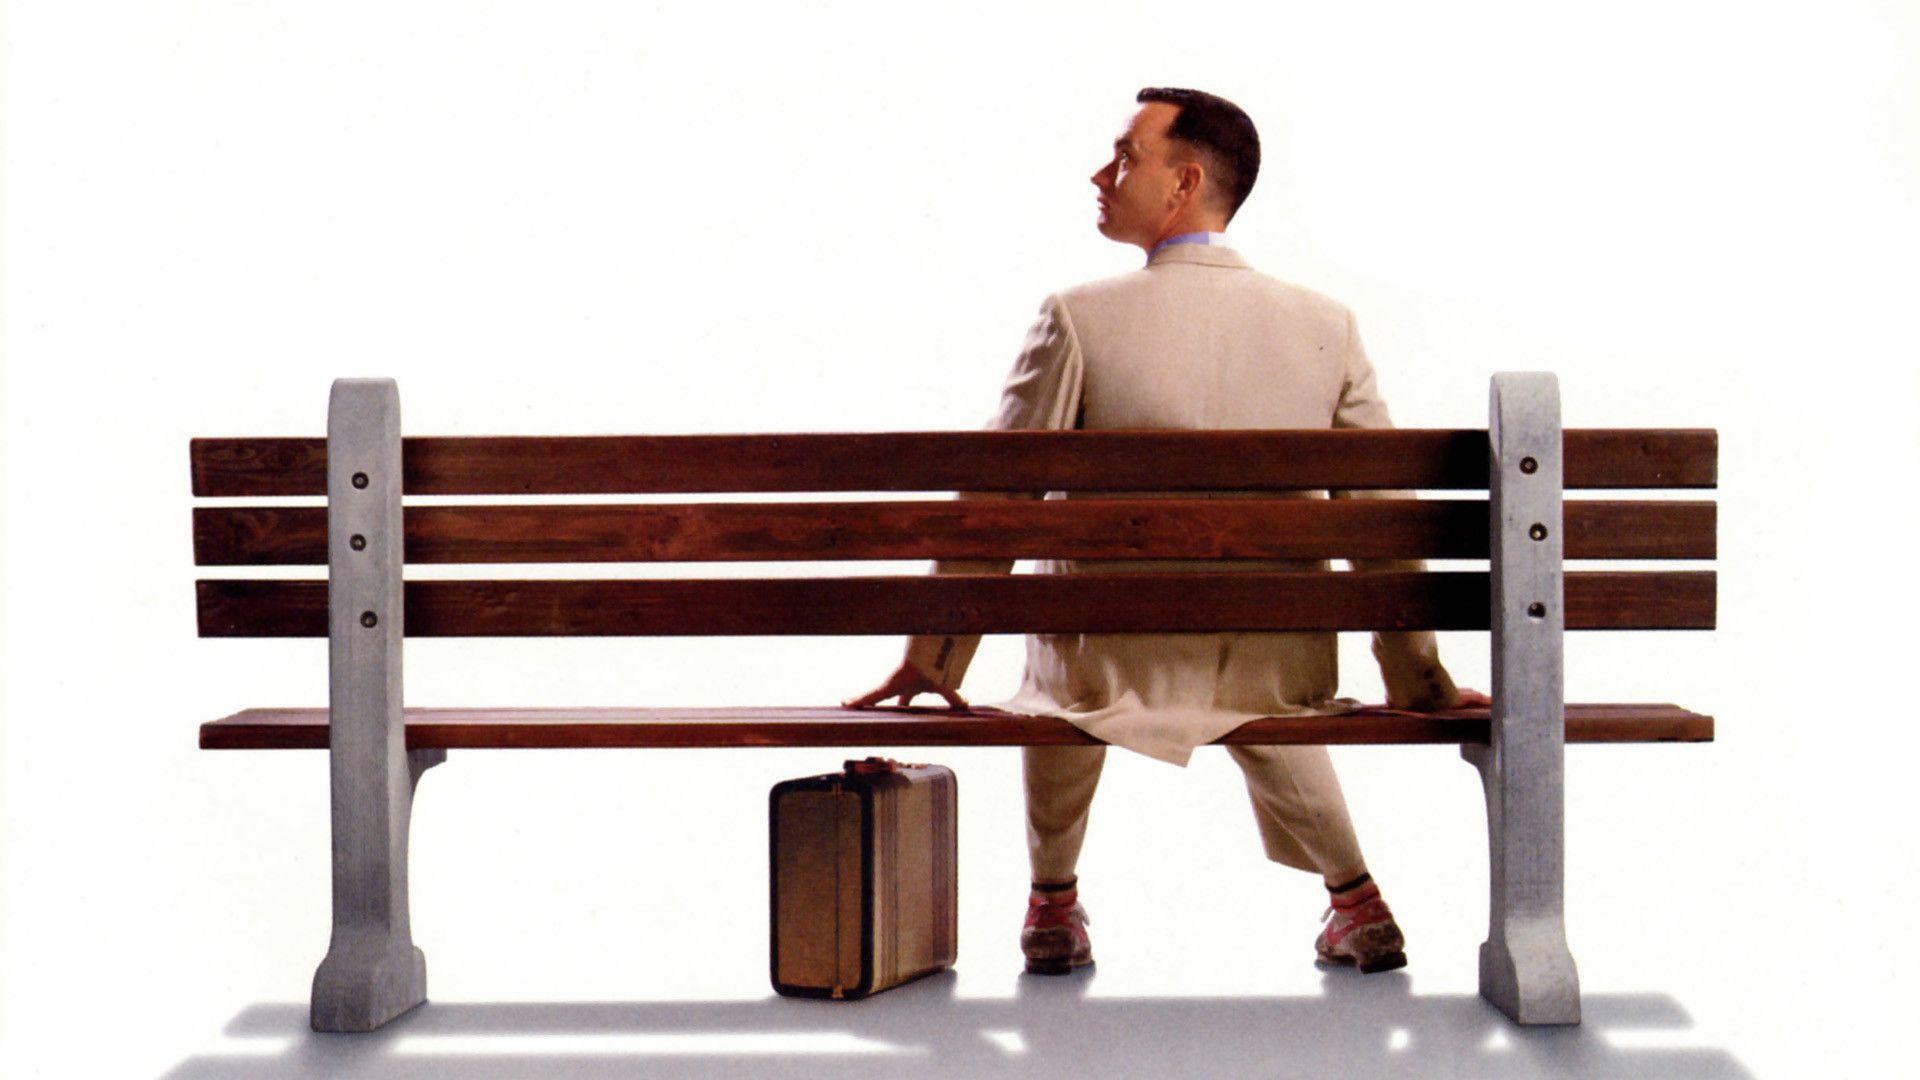 Forrest Gump posters, wallpaper, trailers